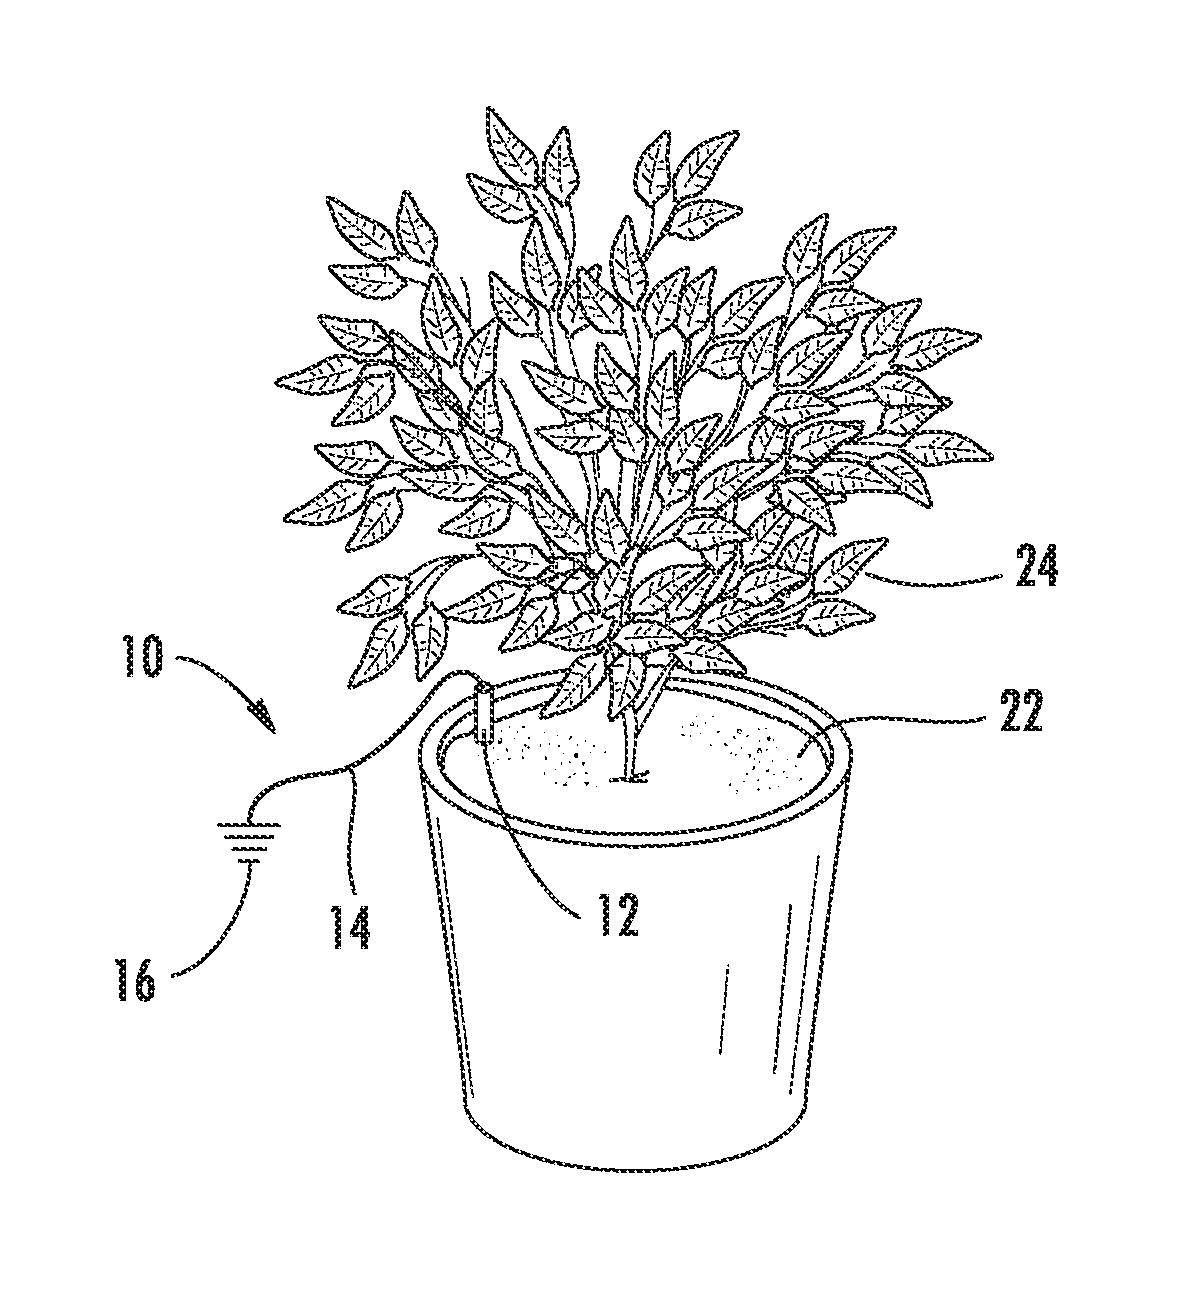 Method and system for organic cultivating and environmental control of container grown plants